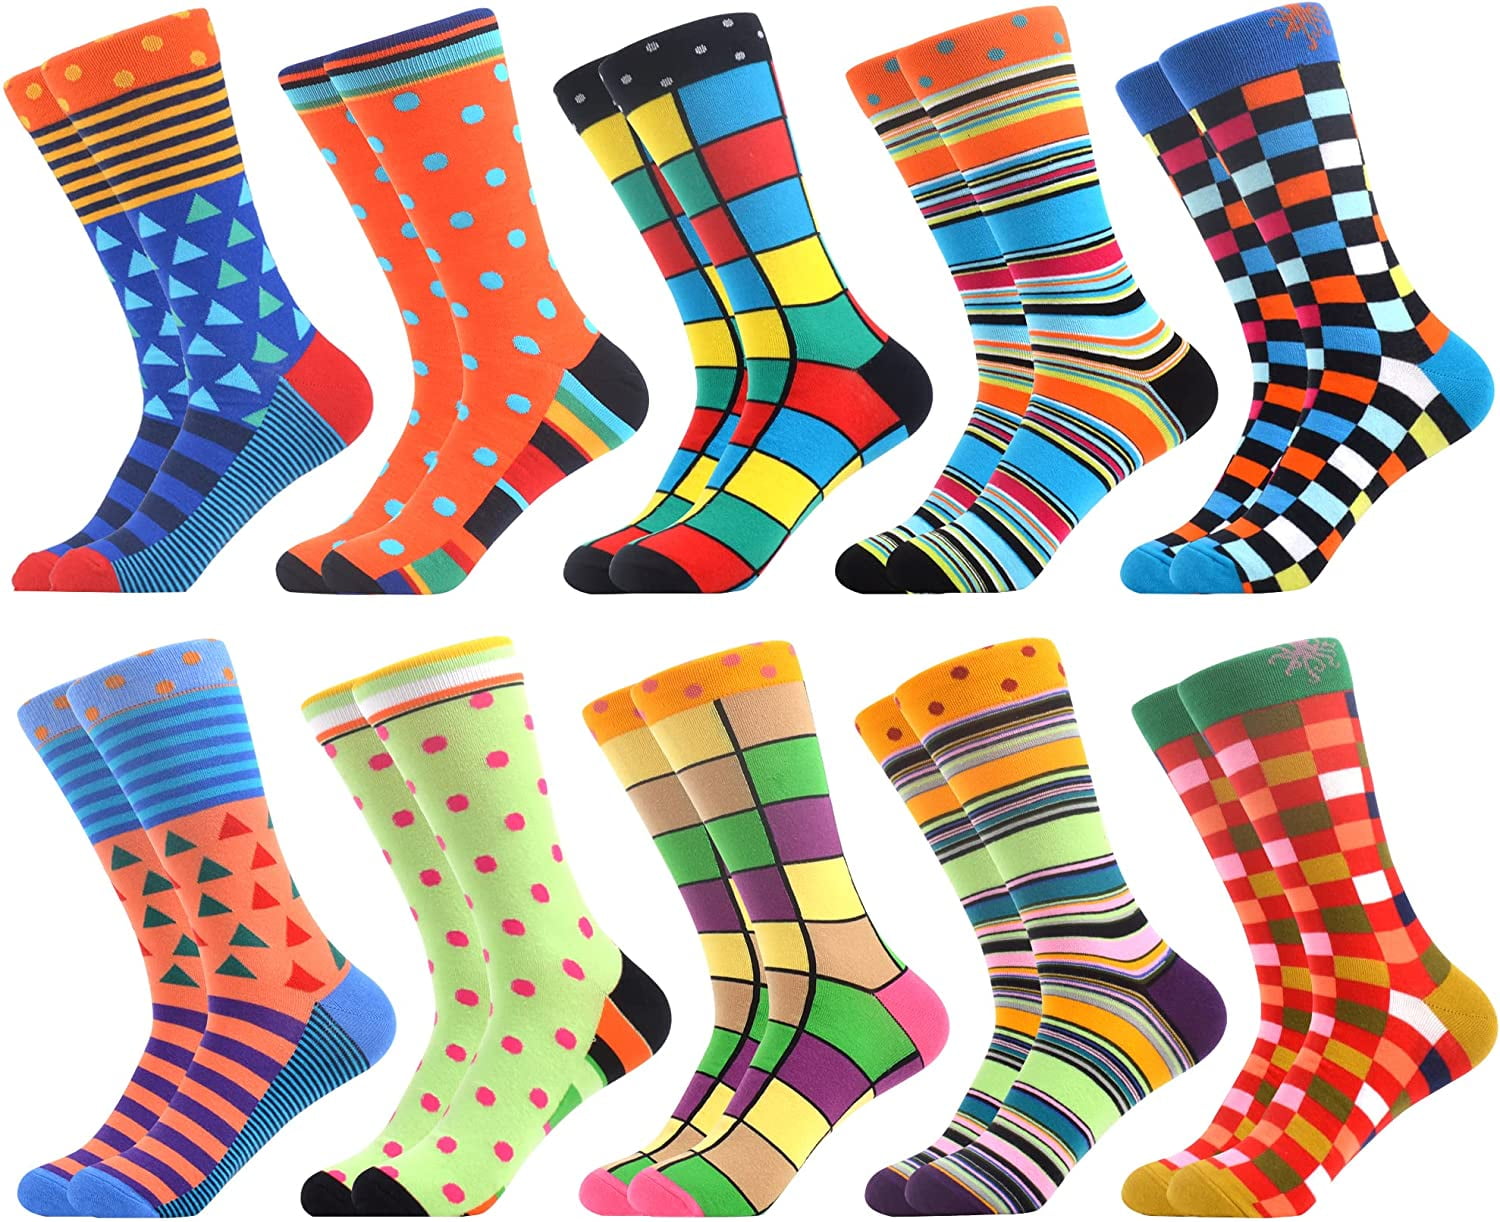 WeciBor Mens Colorful Funny Novelty Casual Combed Cotton Crew Socks Gift 